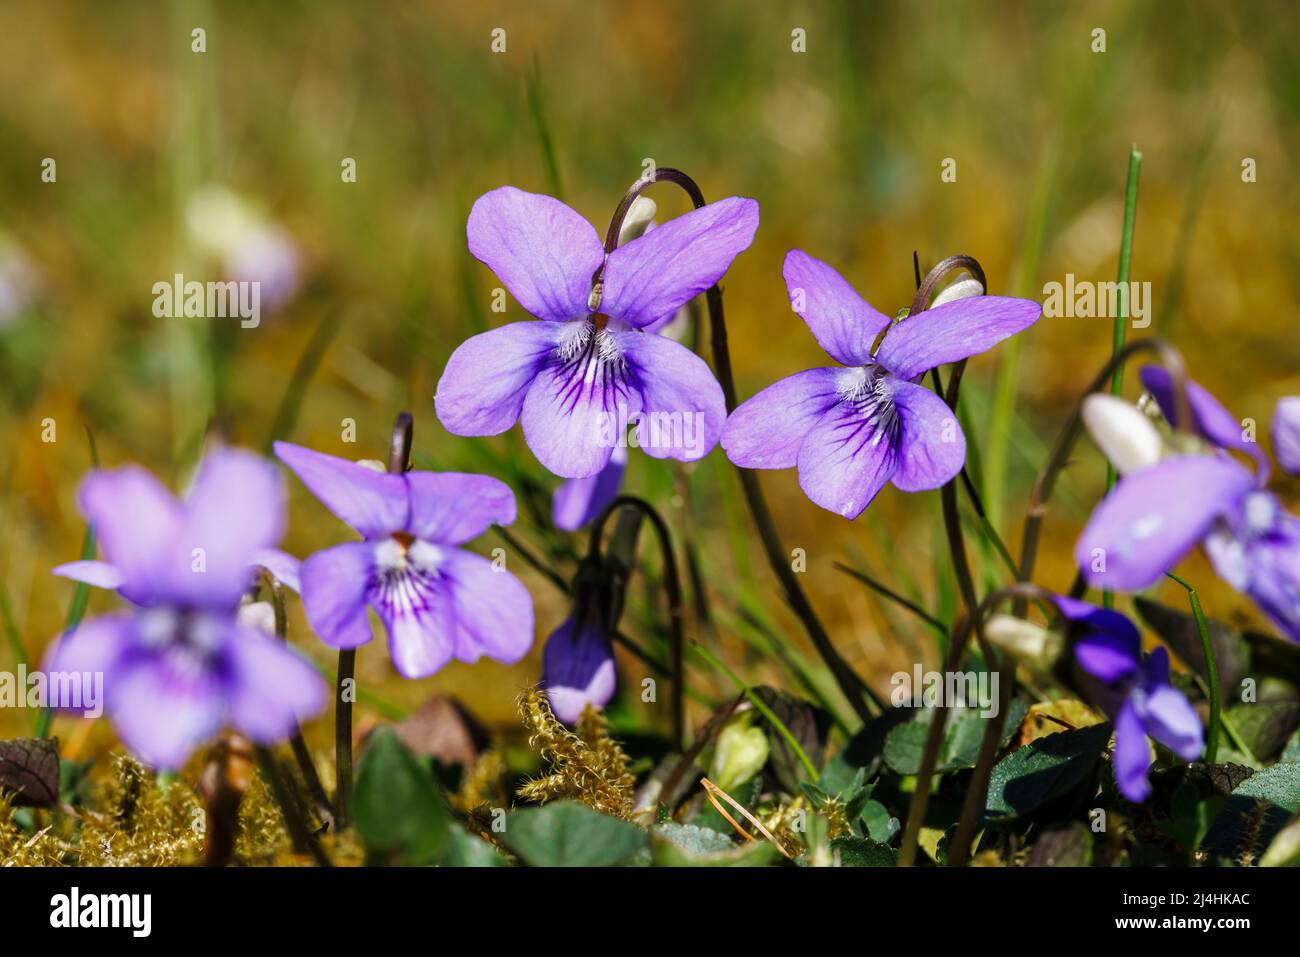 Wild violet (Common Dog-violet, Viola riviniana), a common weed growing in a lawn flowering in early spring in a garden in Surrey, south-east England Stock Photo